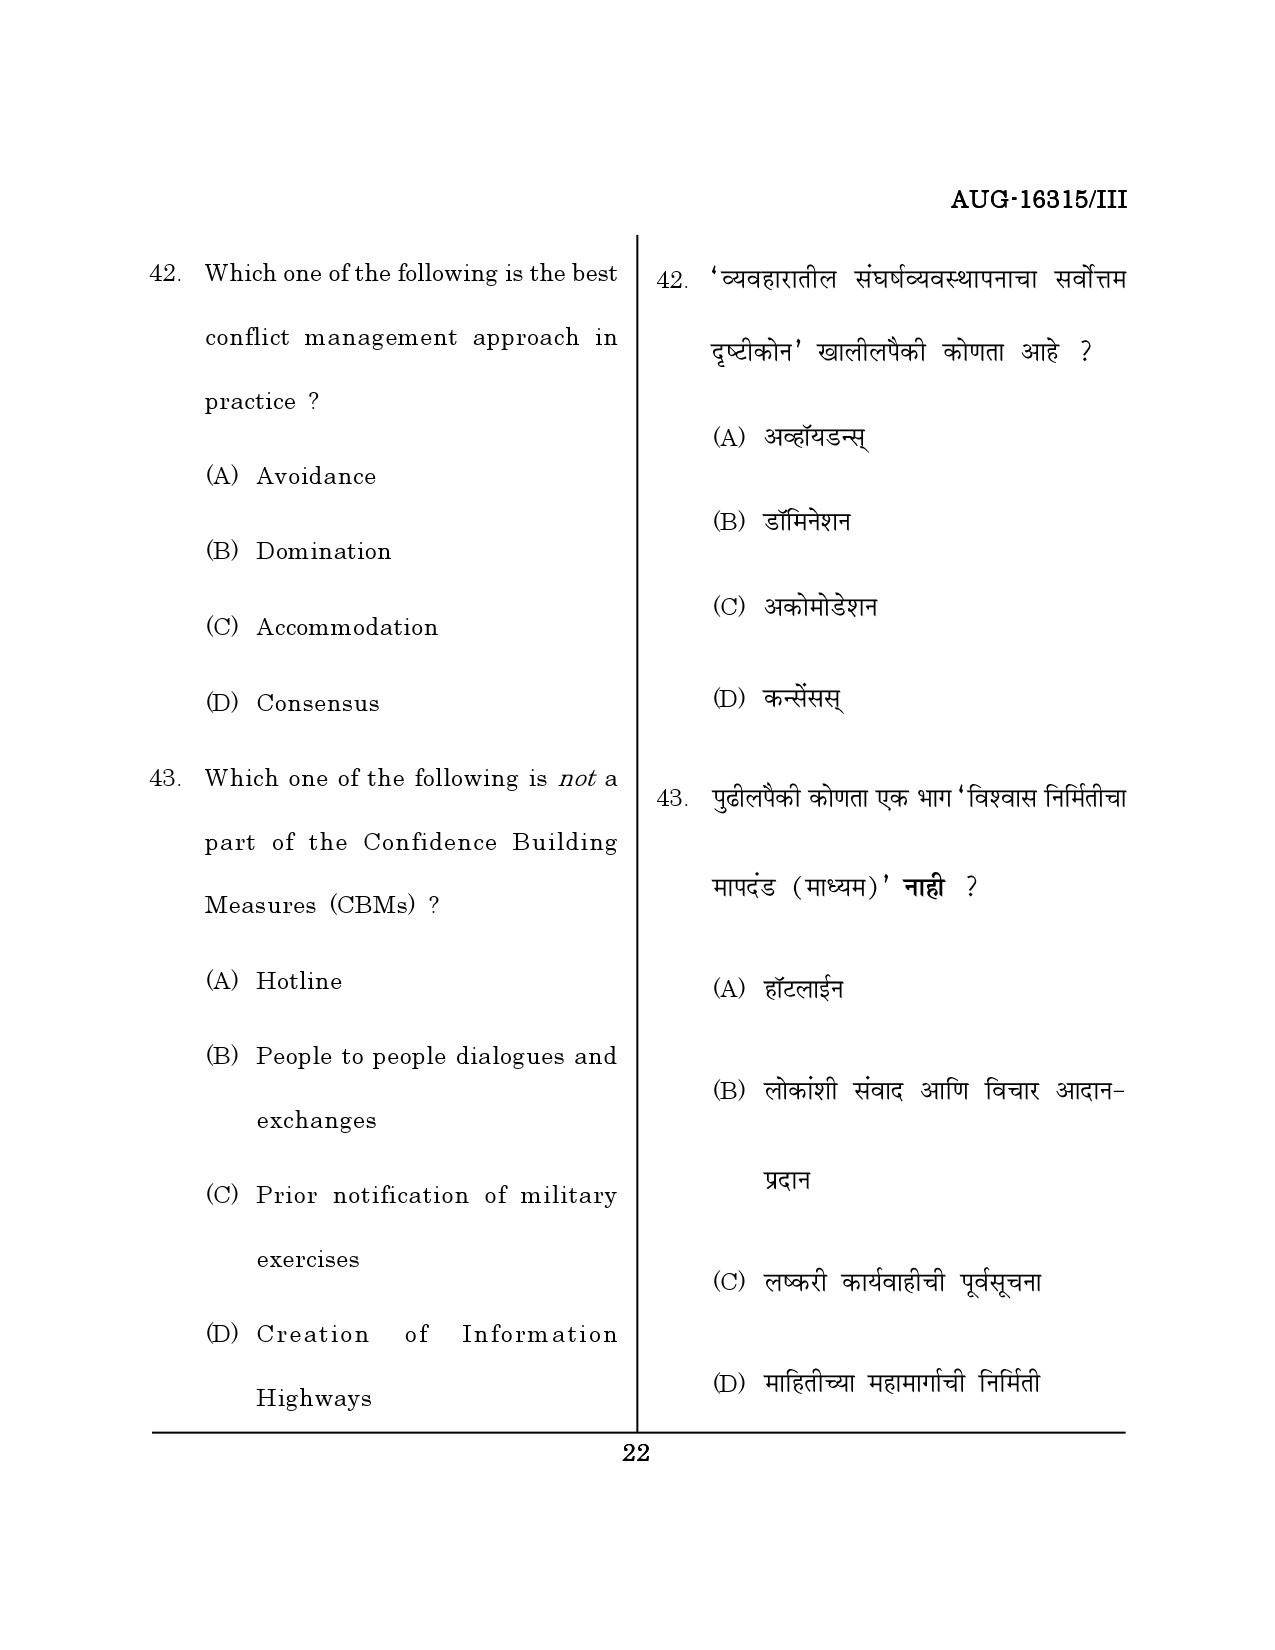 Maharashtra SET Defence and Strategic Studies Question Paper III August 2015 21